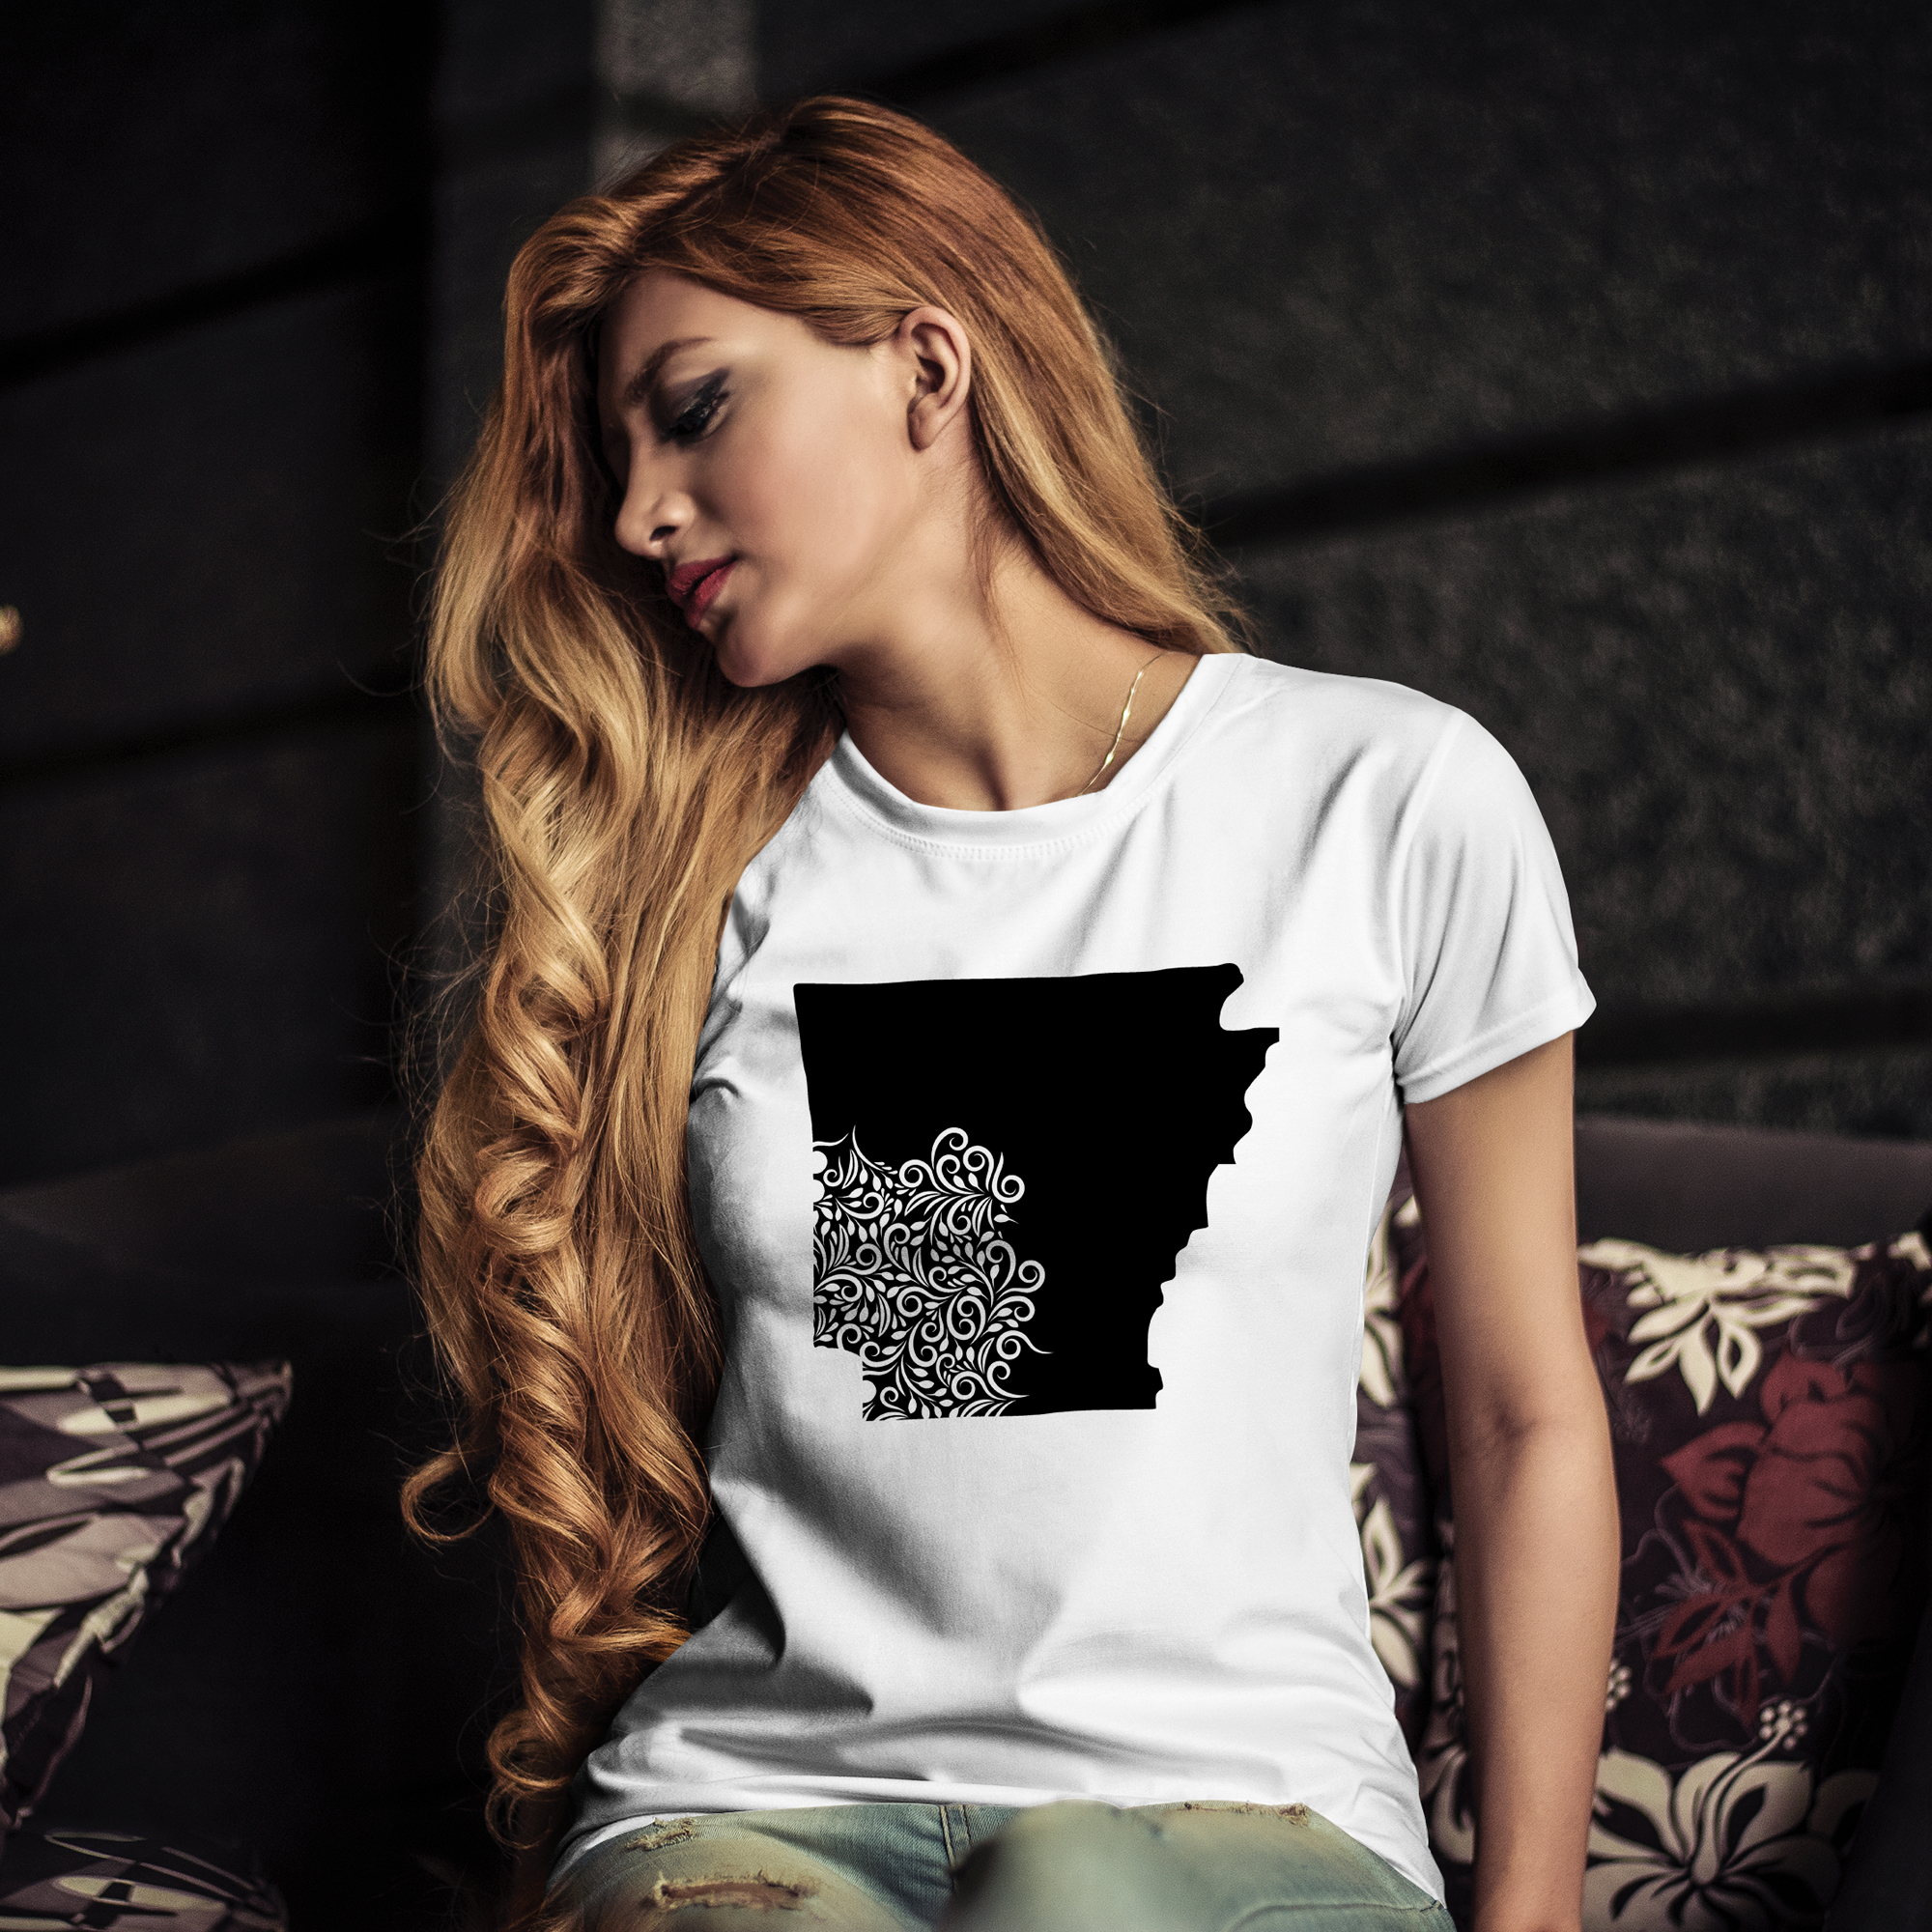 A state print on a girl's T-shirt.